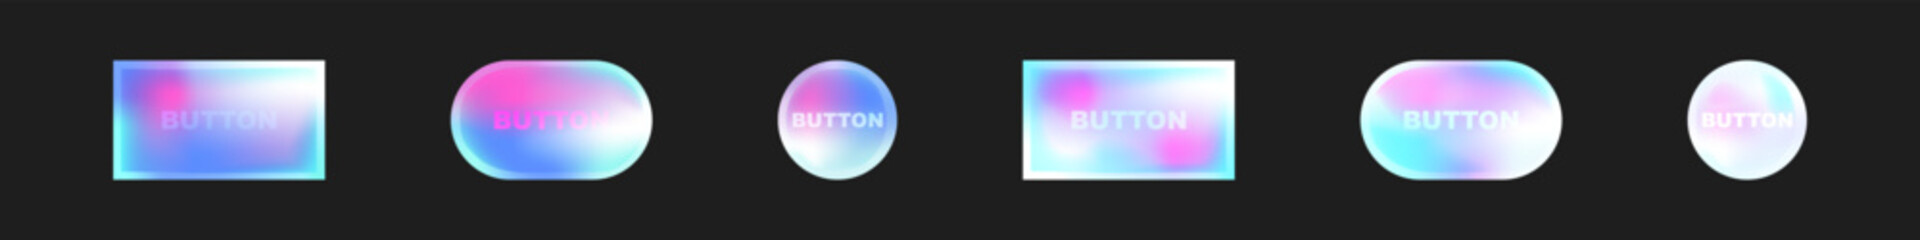 Gradient button vector set. Colorful glossy buttons interface design element.